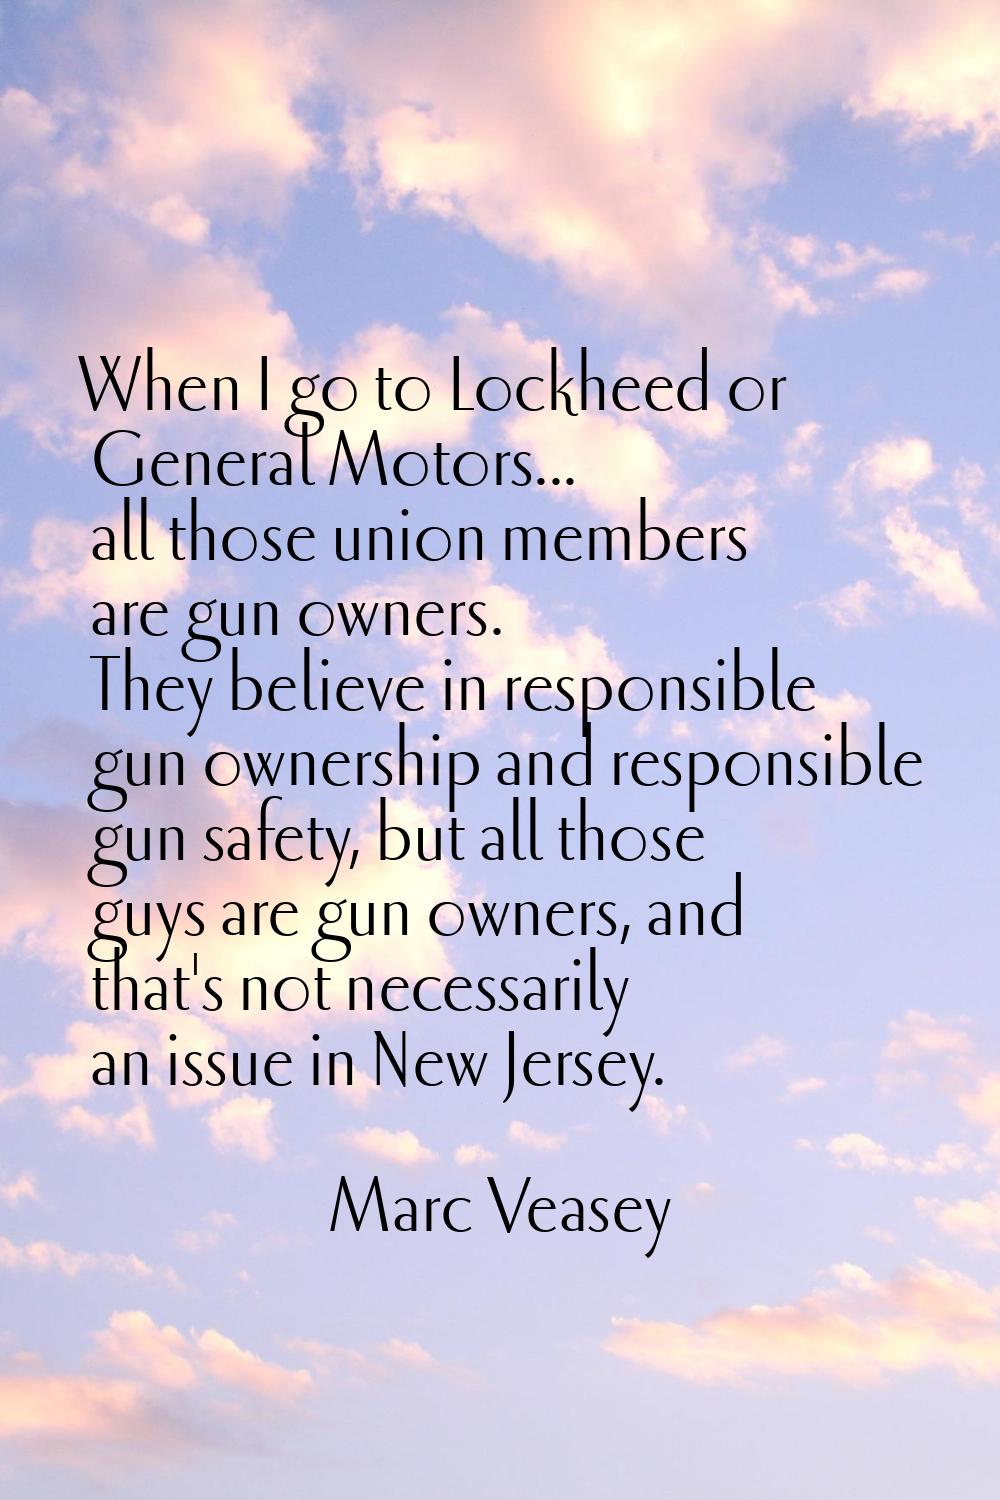 When I go to Lockheed or General Motors... all those union members are gun owners. They believe in 